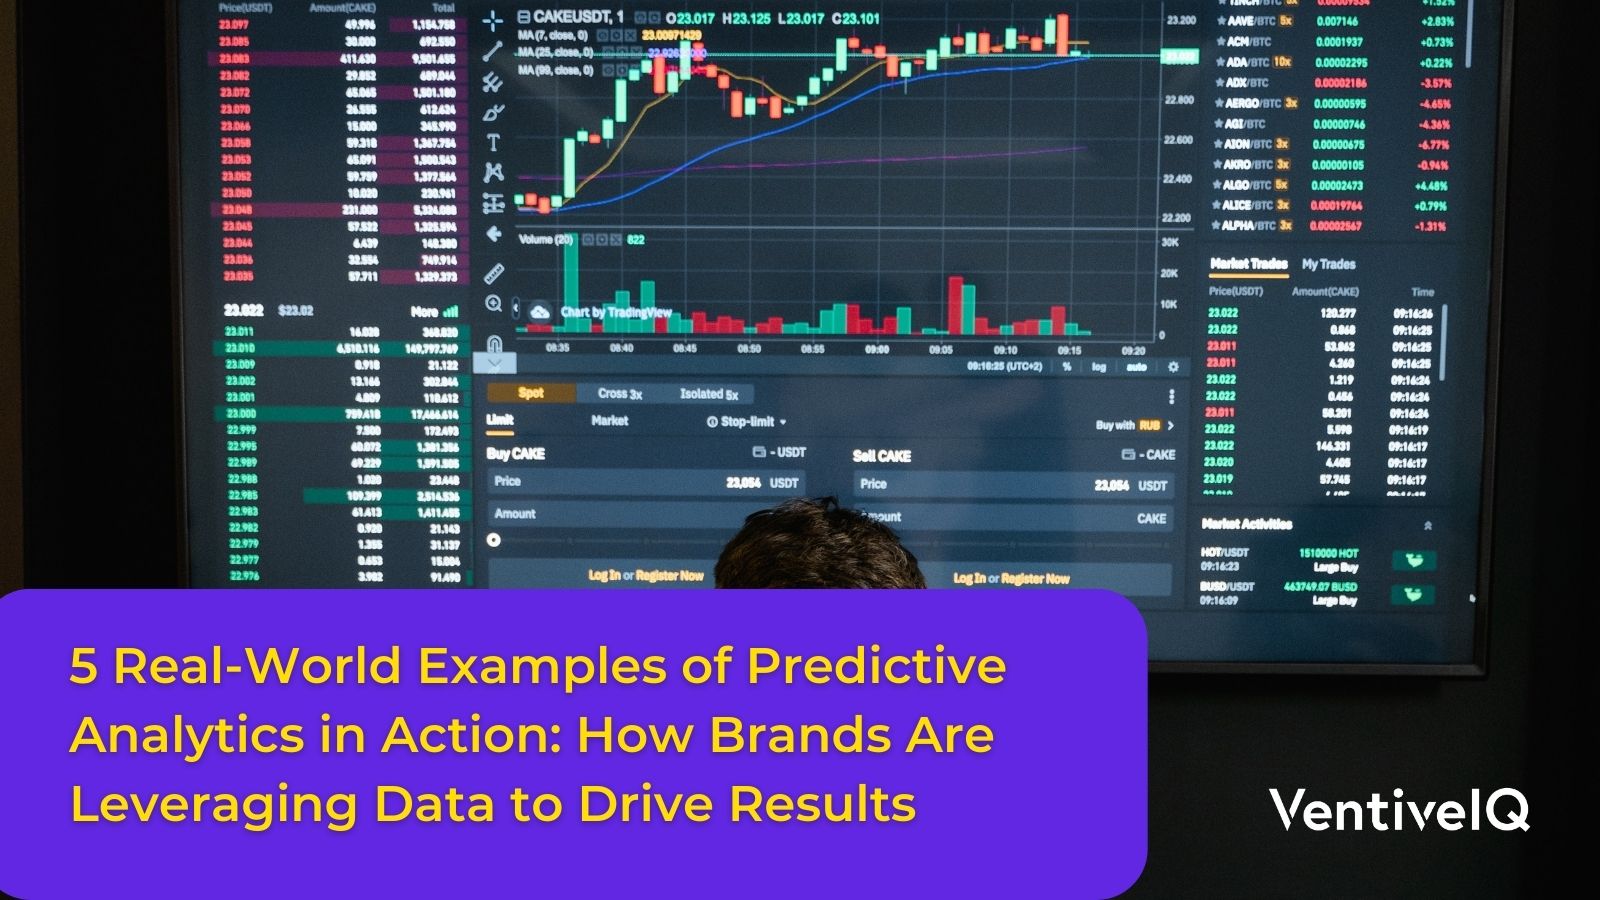 5 Real-World Examples of Predictive Analytics in Action – Leveraging Data